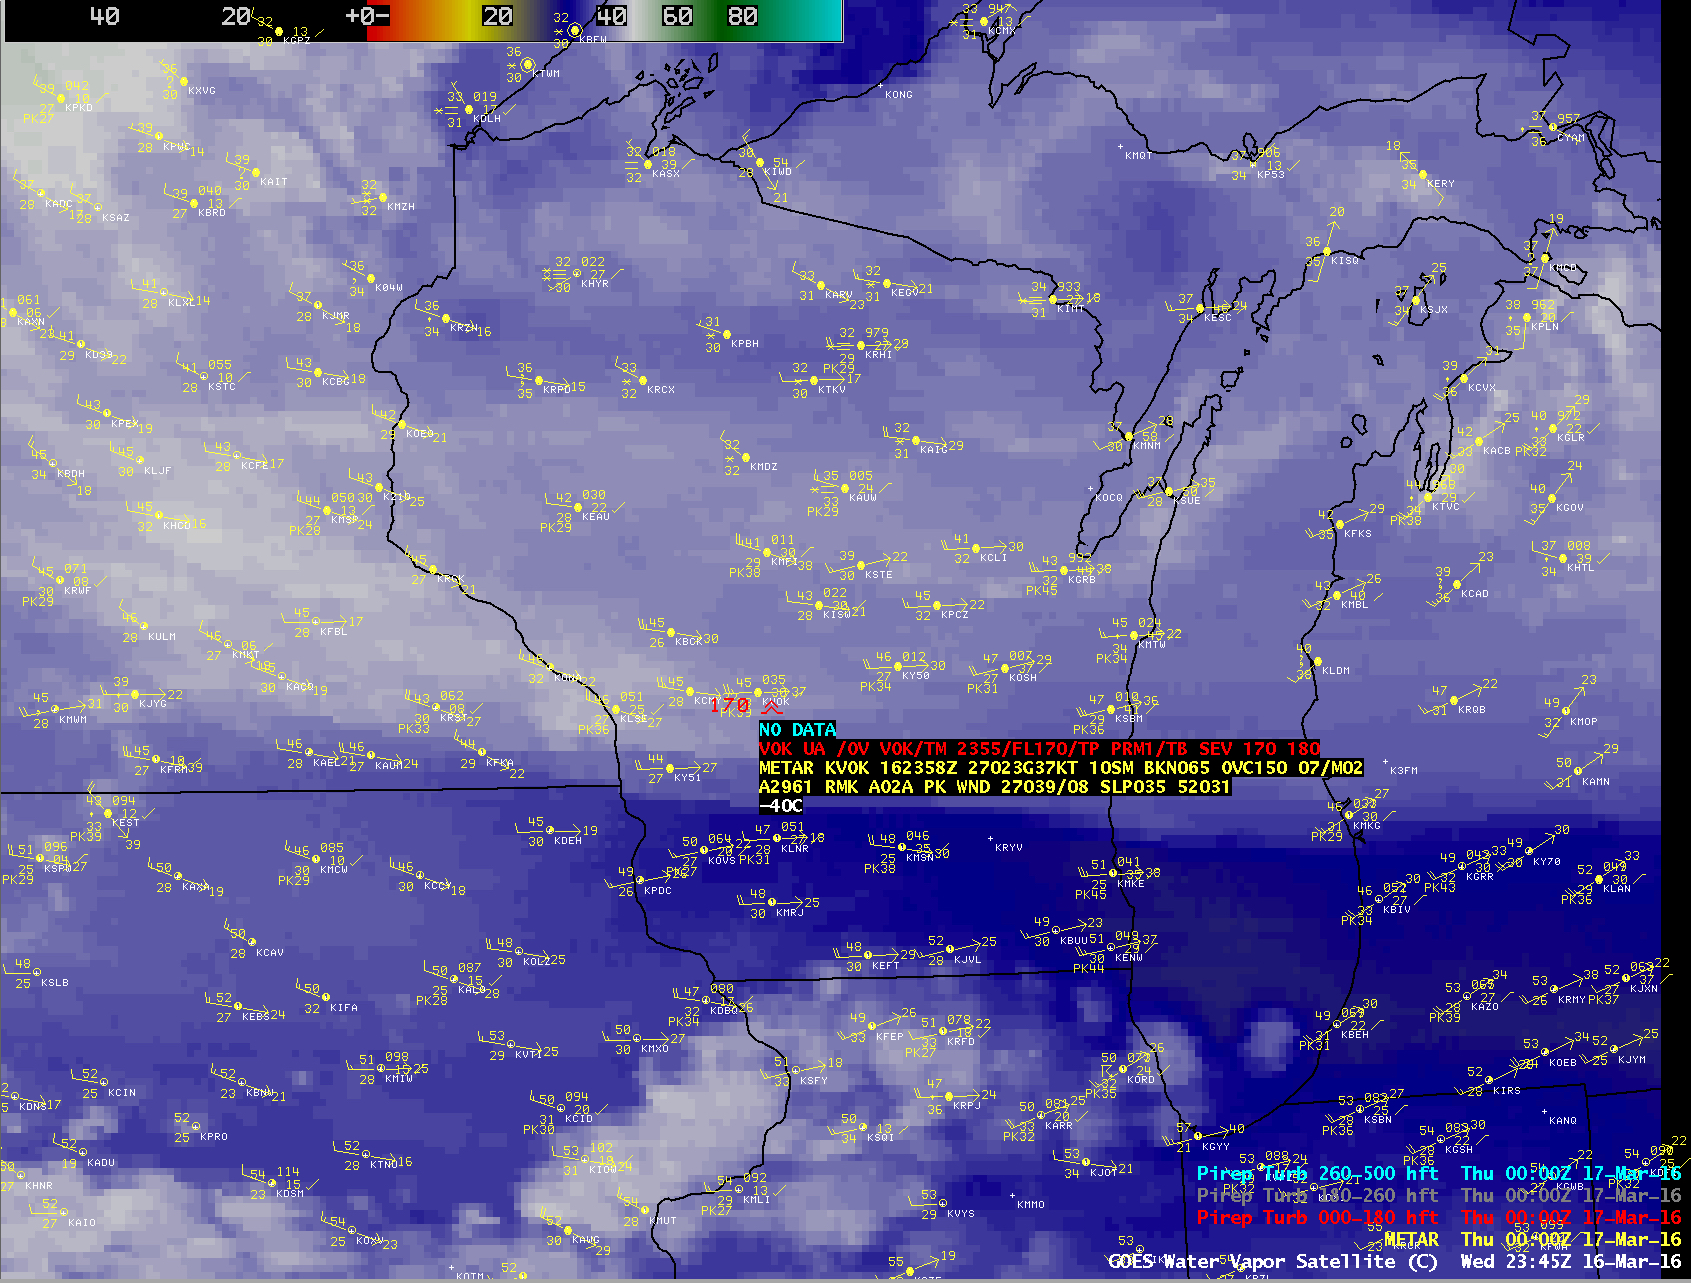 GOES-13 Water Vapor image, with pilot report of severe turbulence [click to enlarge]